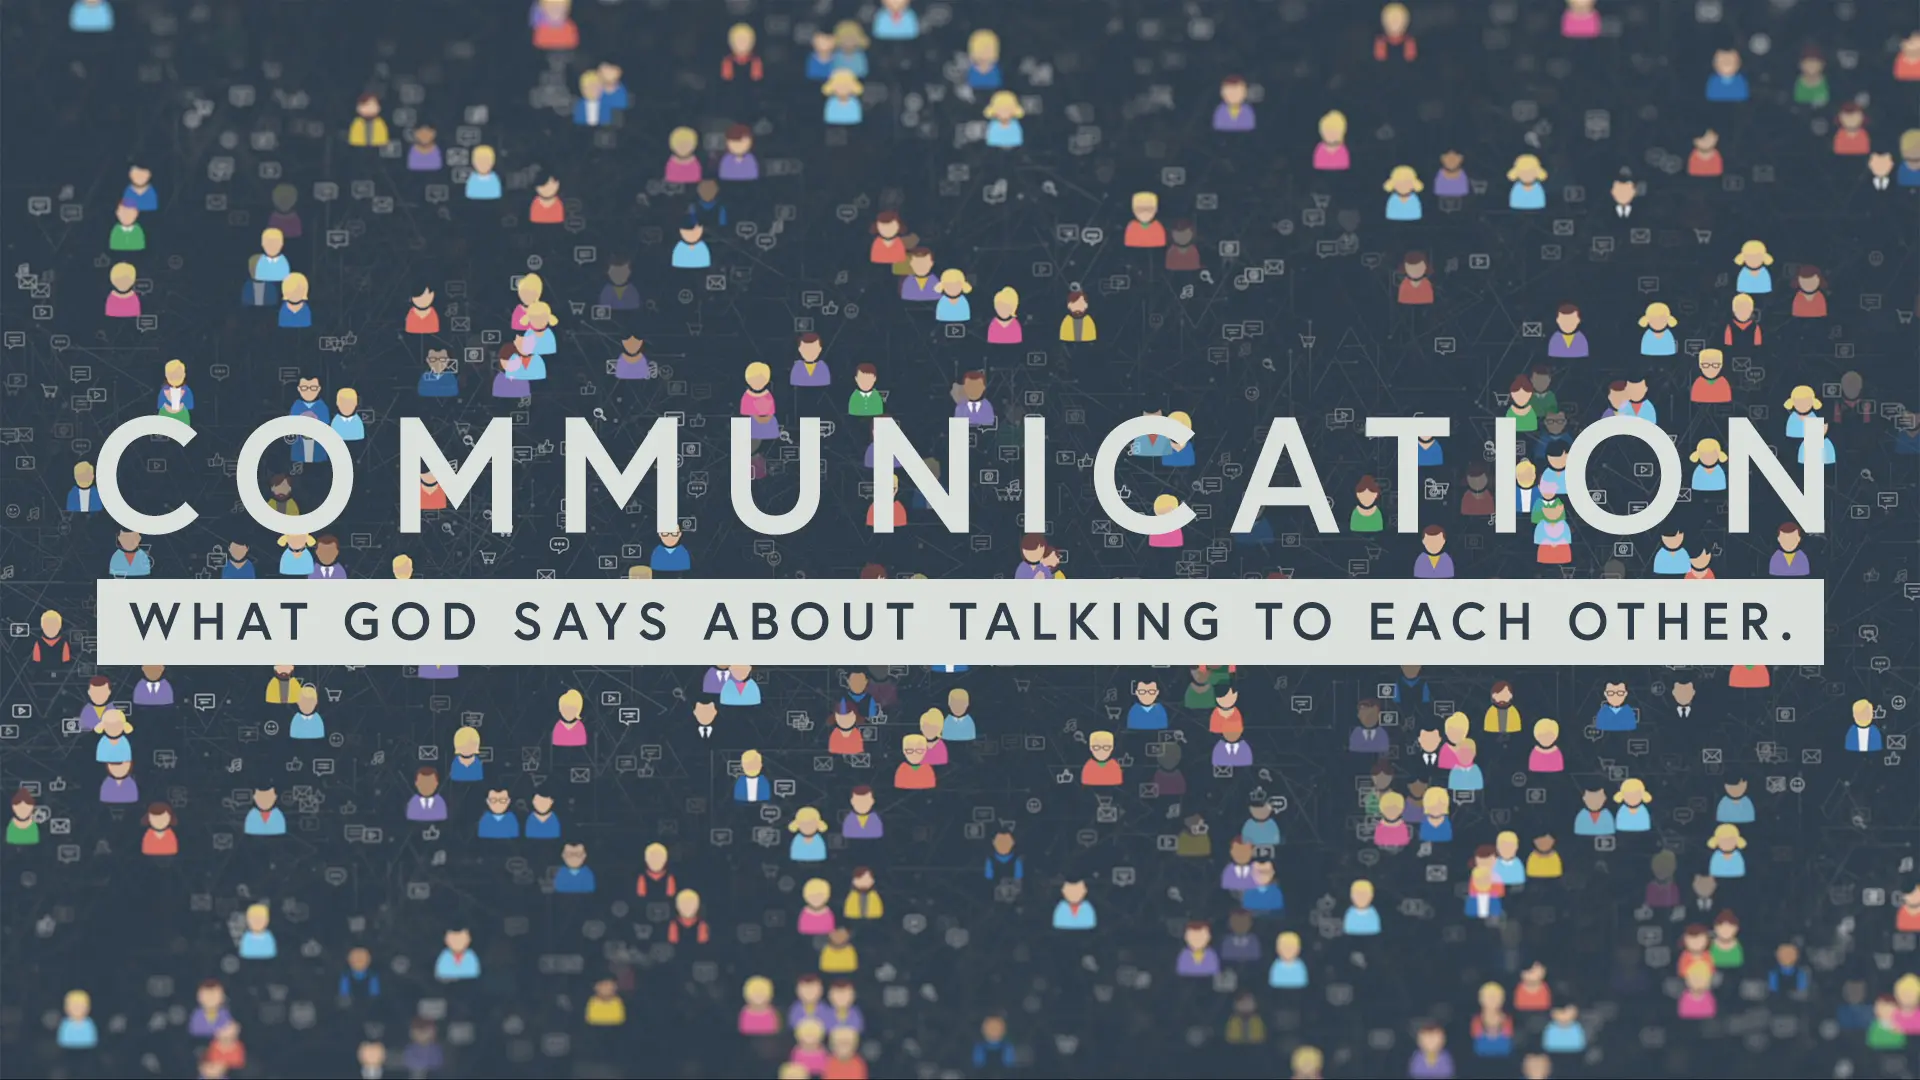 Featured image for “Communication”